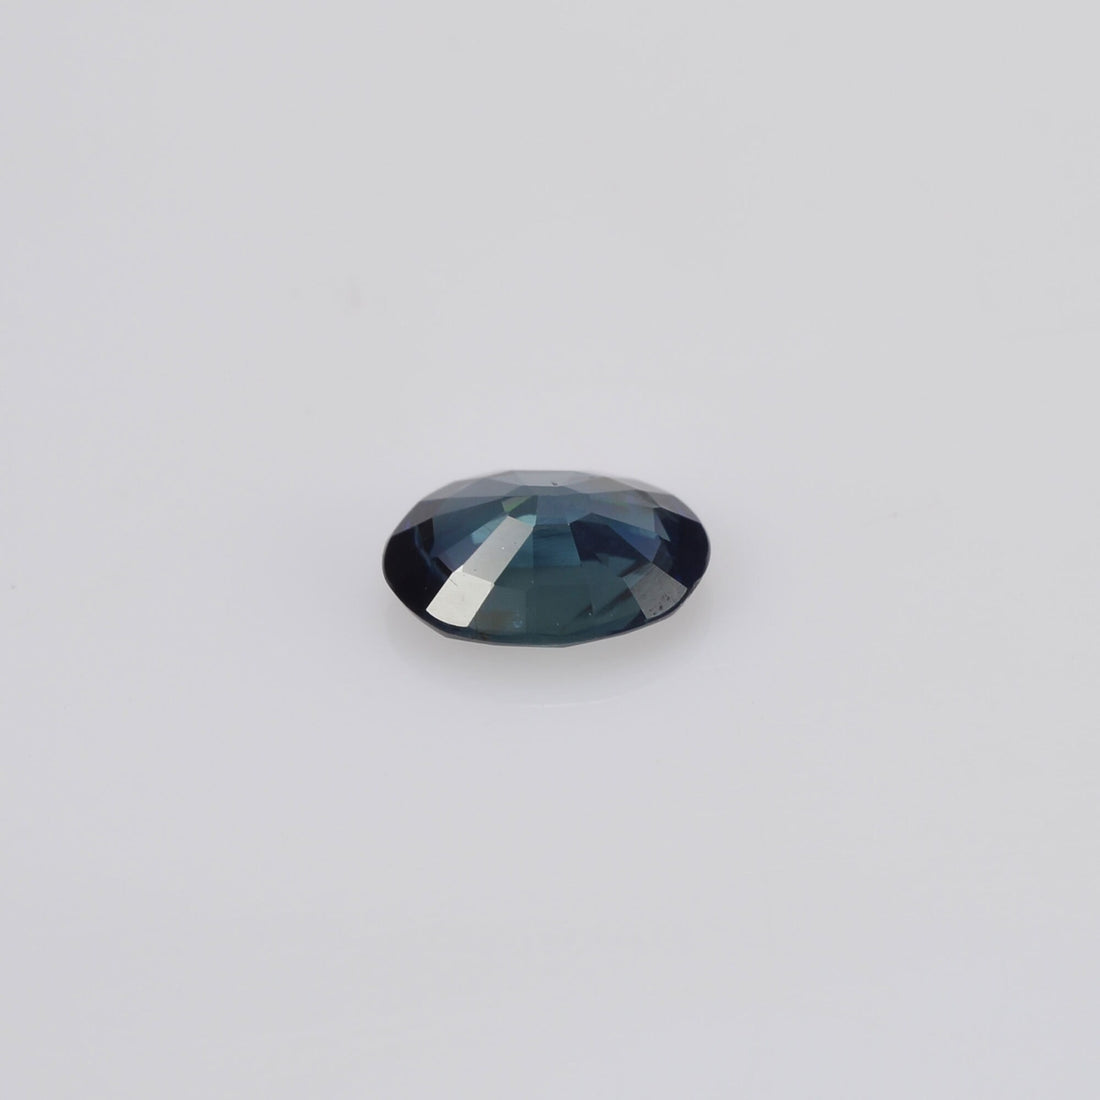 0.61 cts Natural Blue Sapphire Loose Gemstone Oval Cut